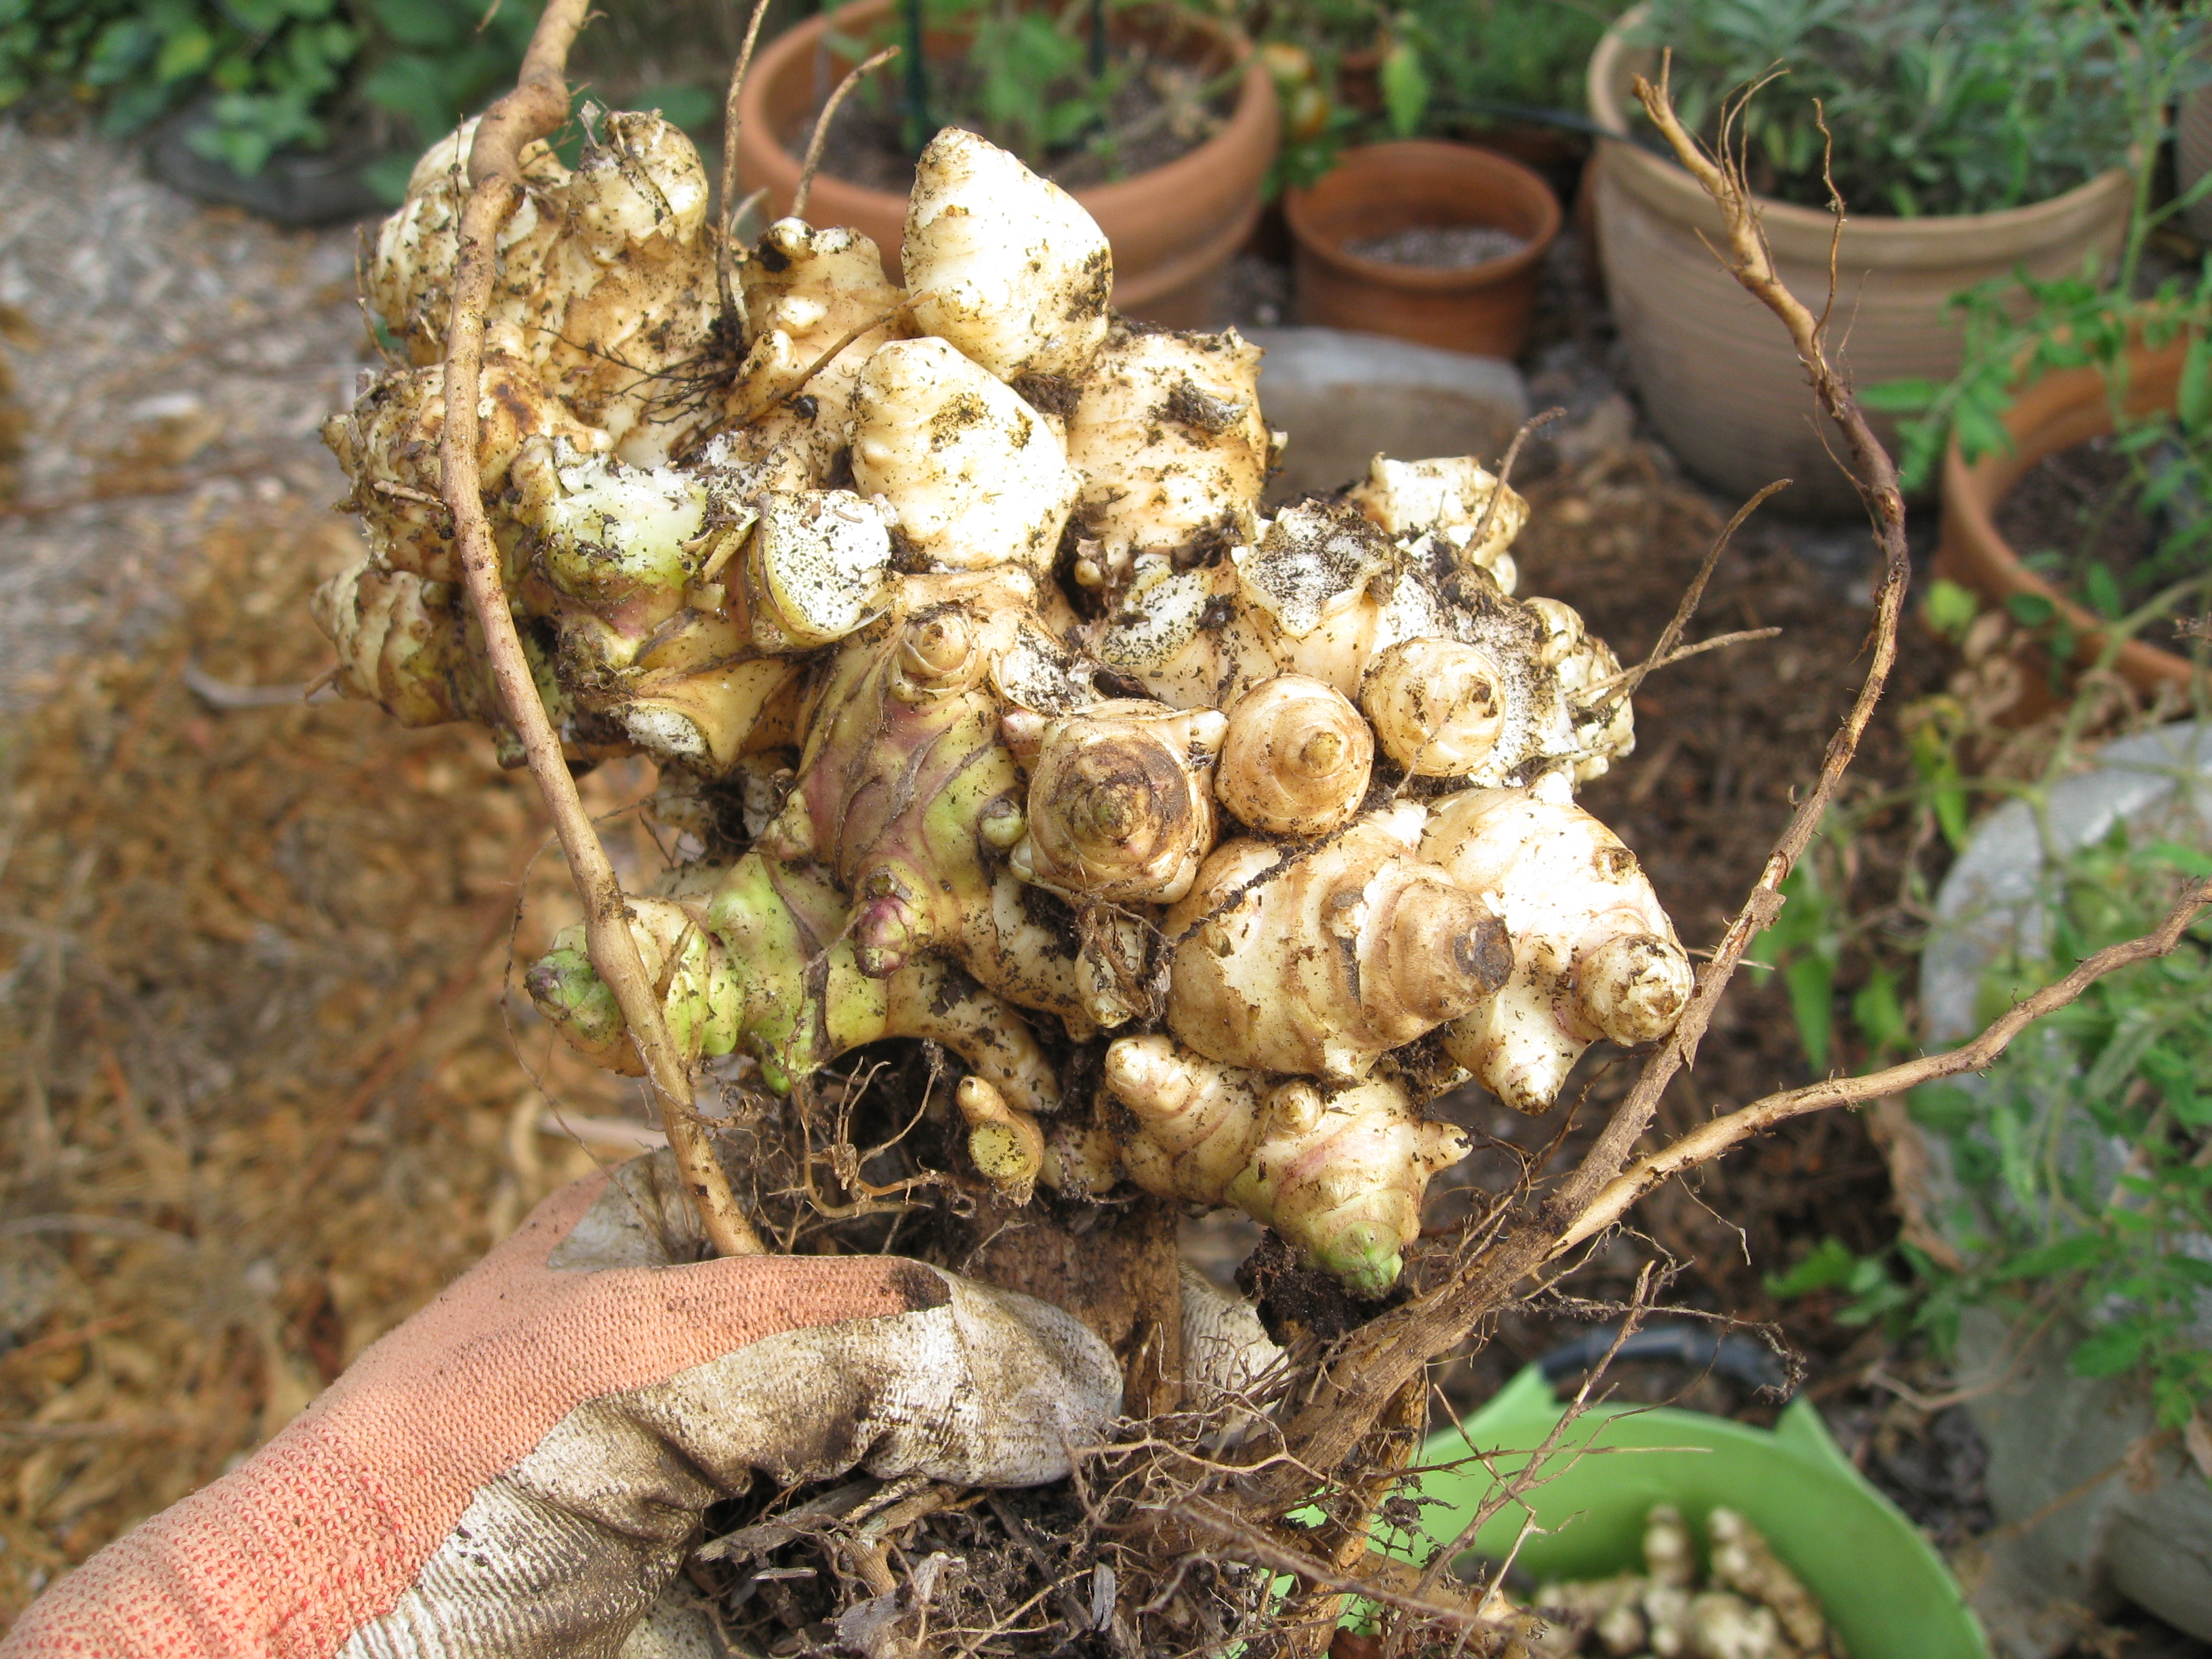 The base of the stem holds a cluster of sunchokes.